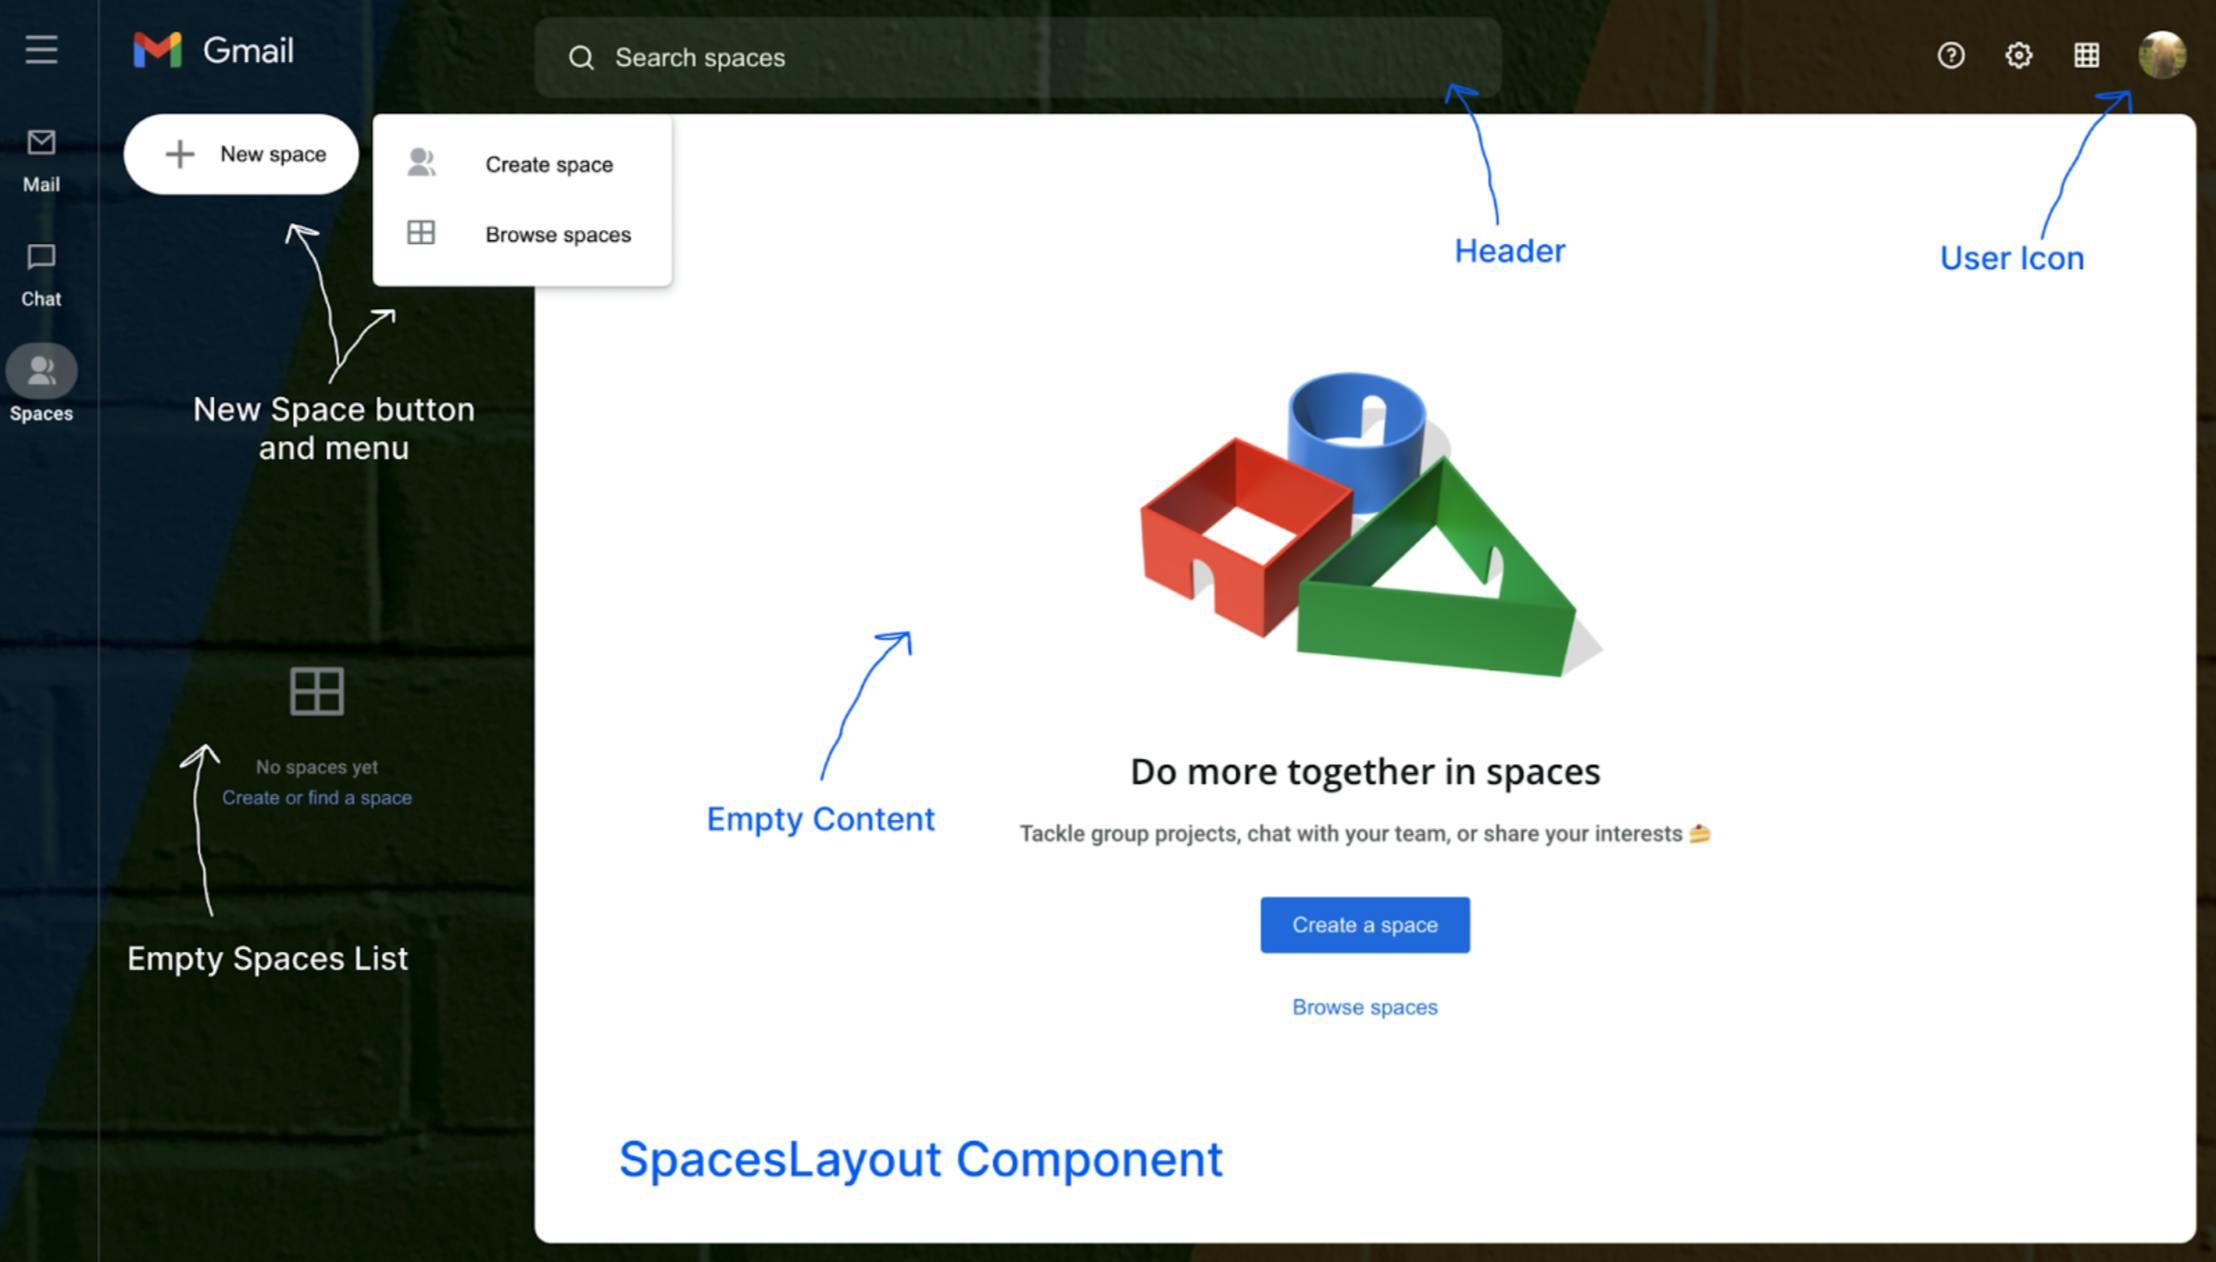 Spaces Layout Component